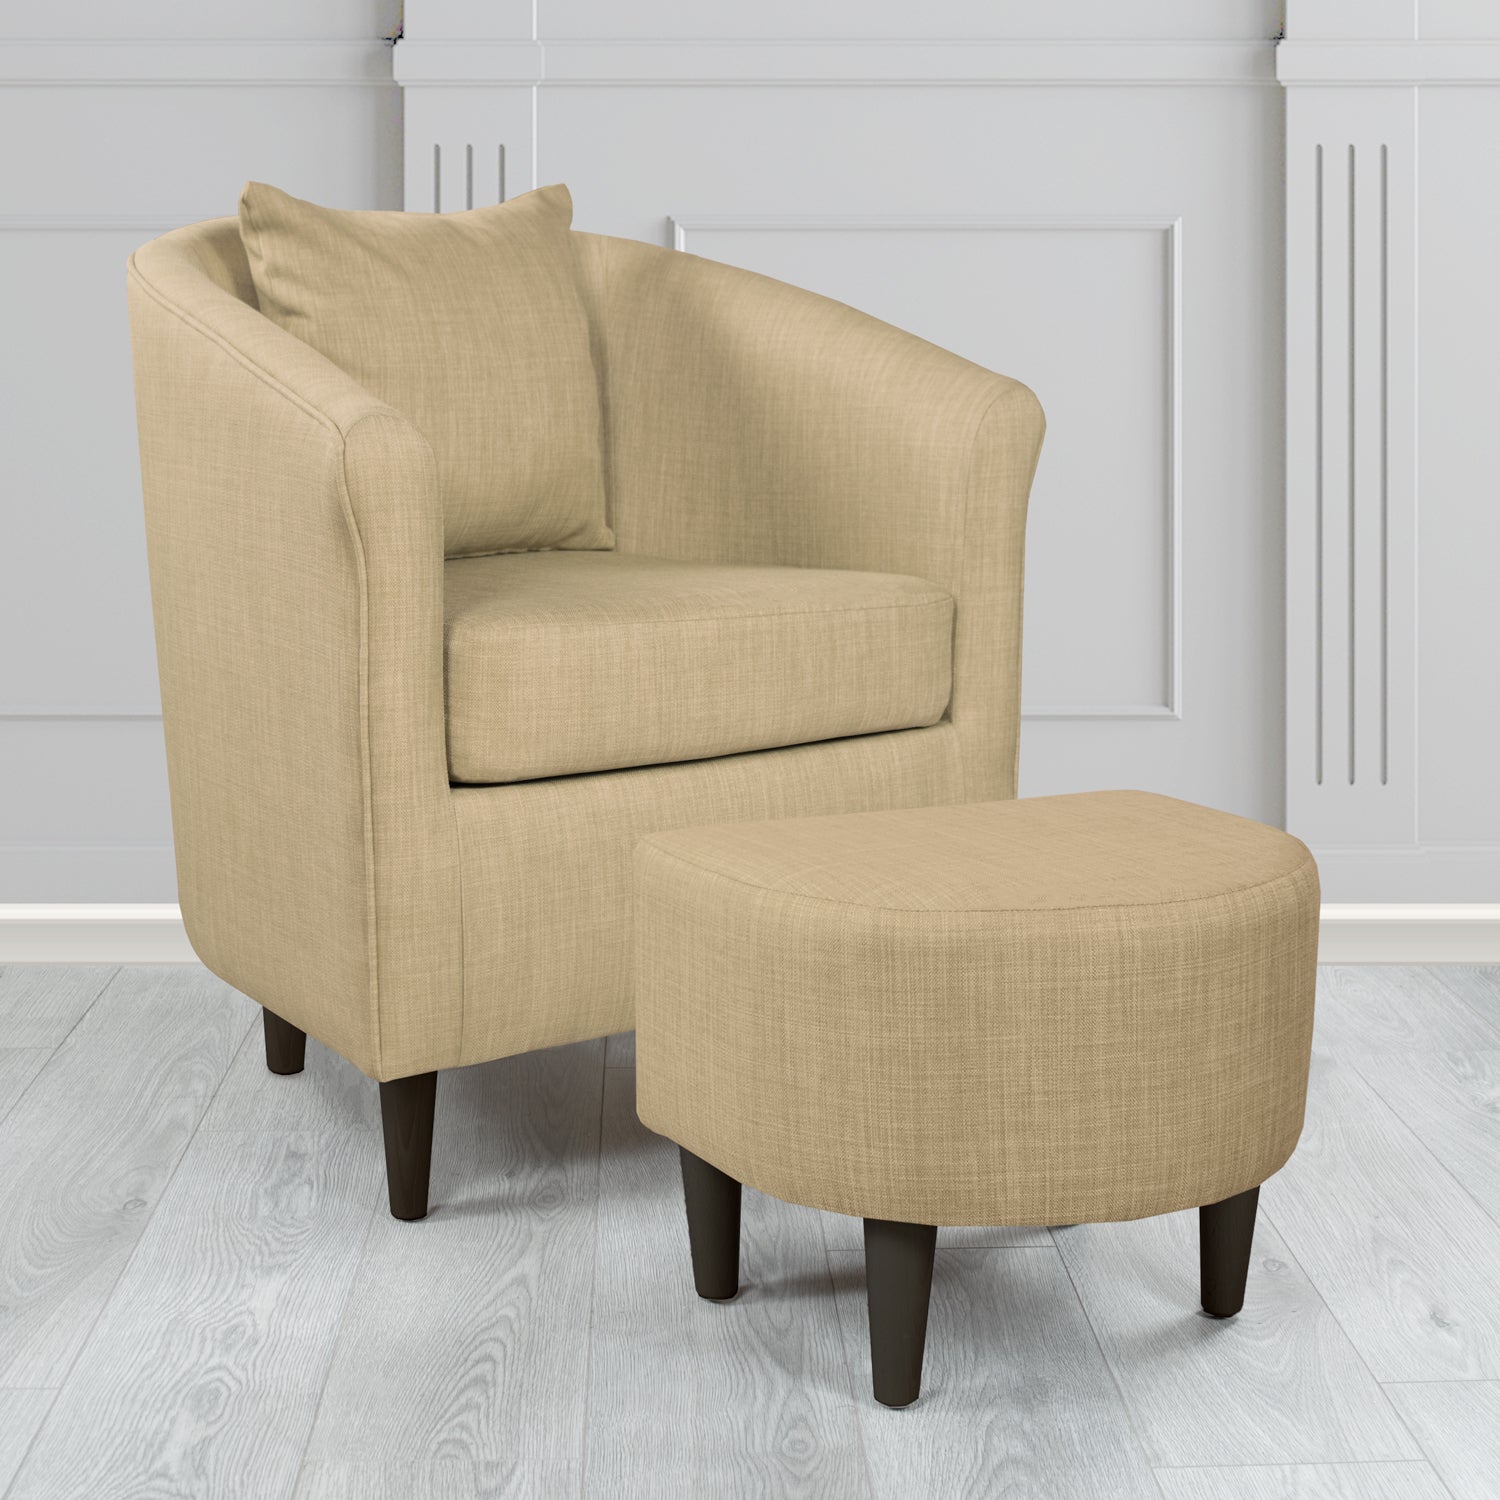 St Tropez Charles Mink Plain Linen Fabric Tub Chair & Footstool Set with Scatter Cushion - The Tub Chair Shop